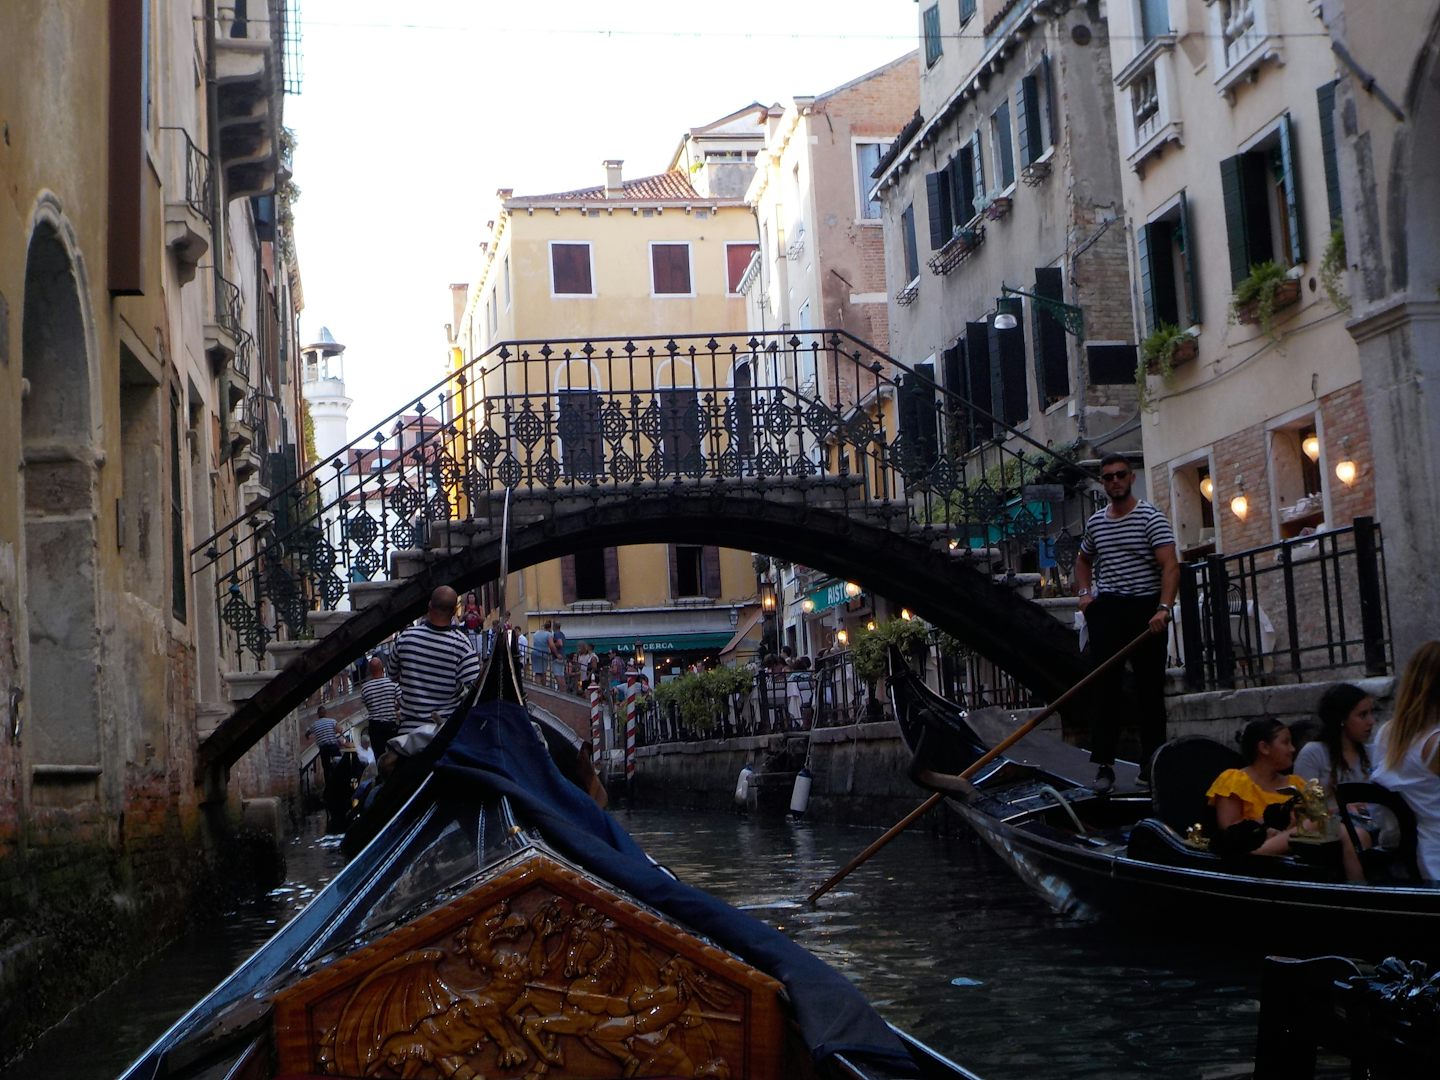 Singing along with the accordions in other gondolas in Venice.